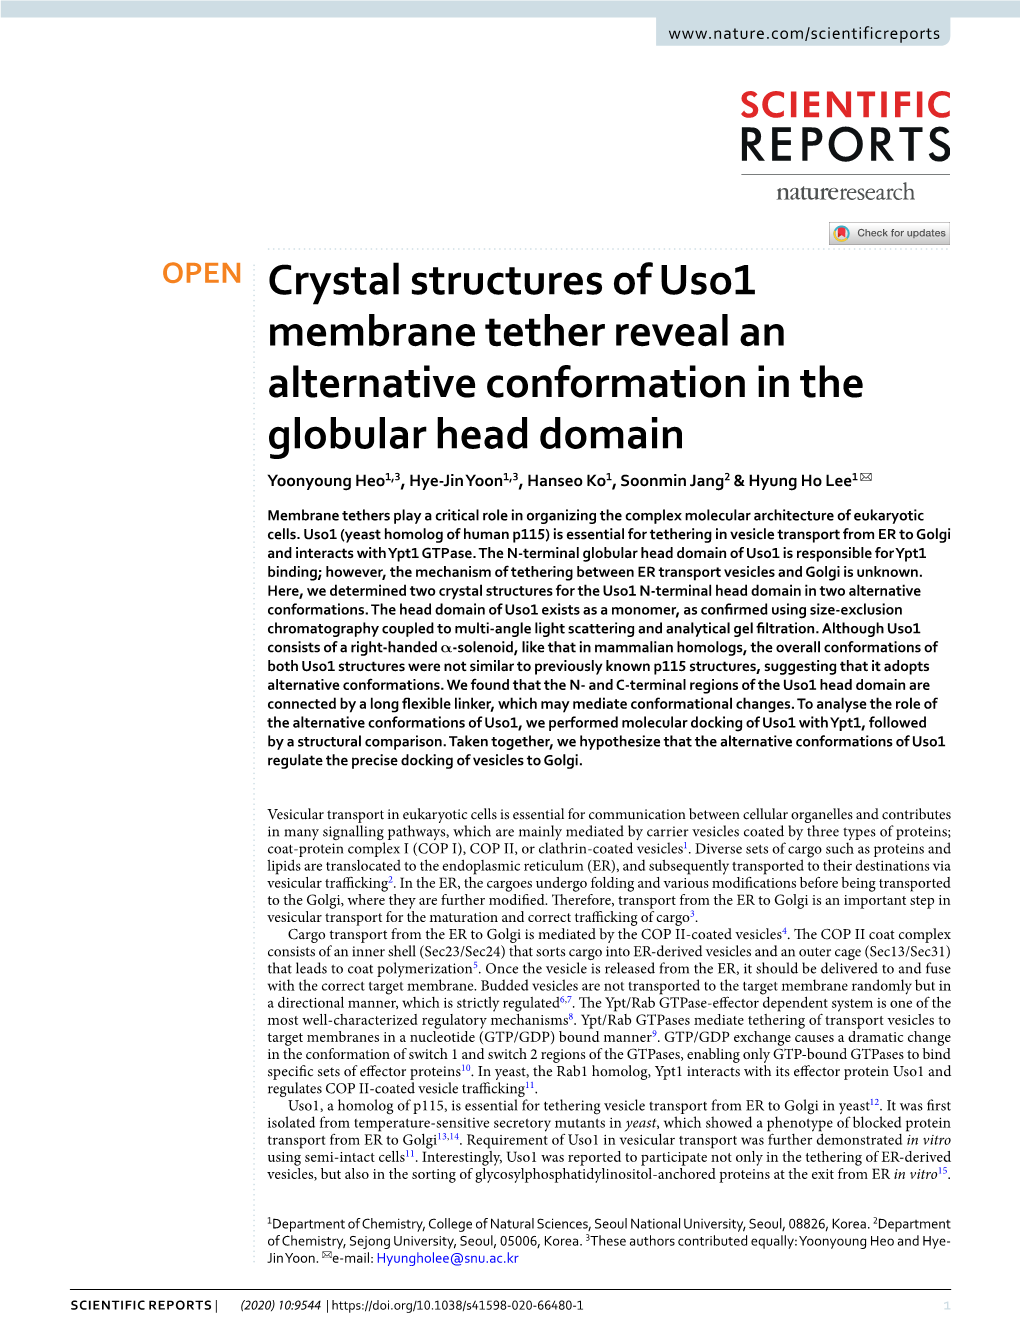 Crystal Structures of Uso1 Membrane Tether Reveal an Alternative Conformation in the Globular Head Domain